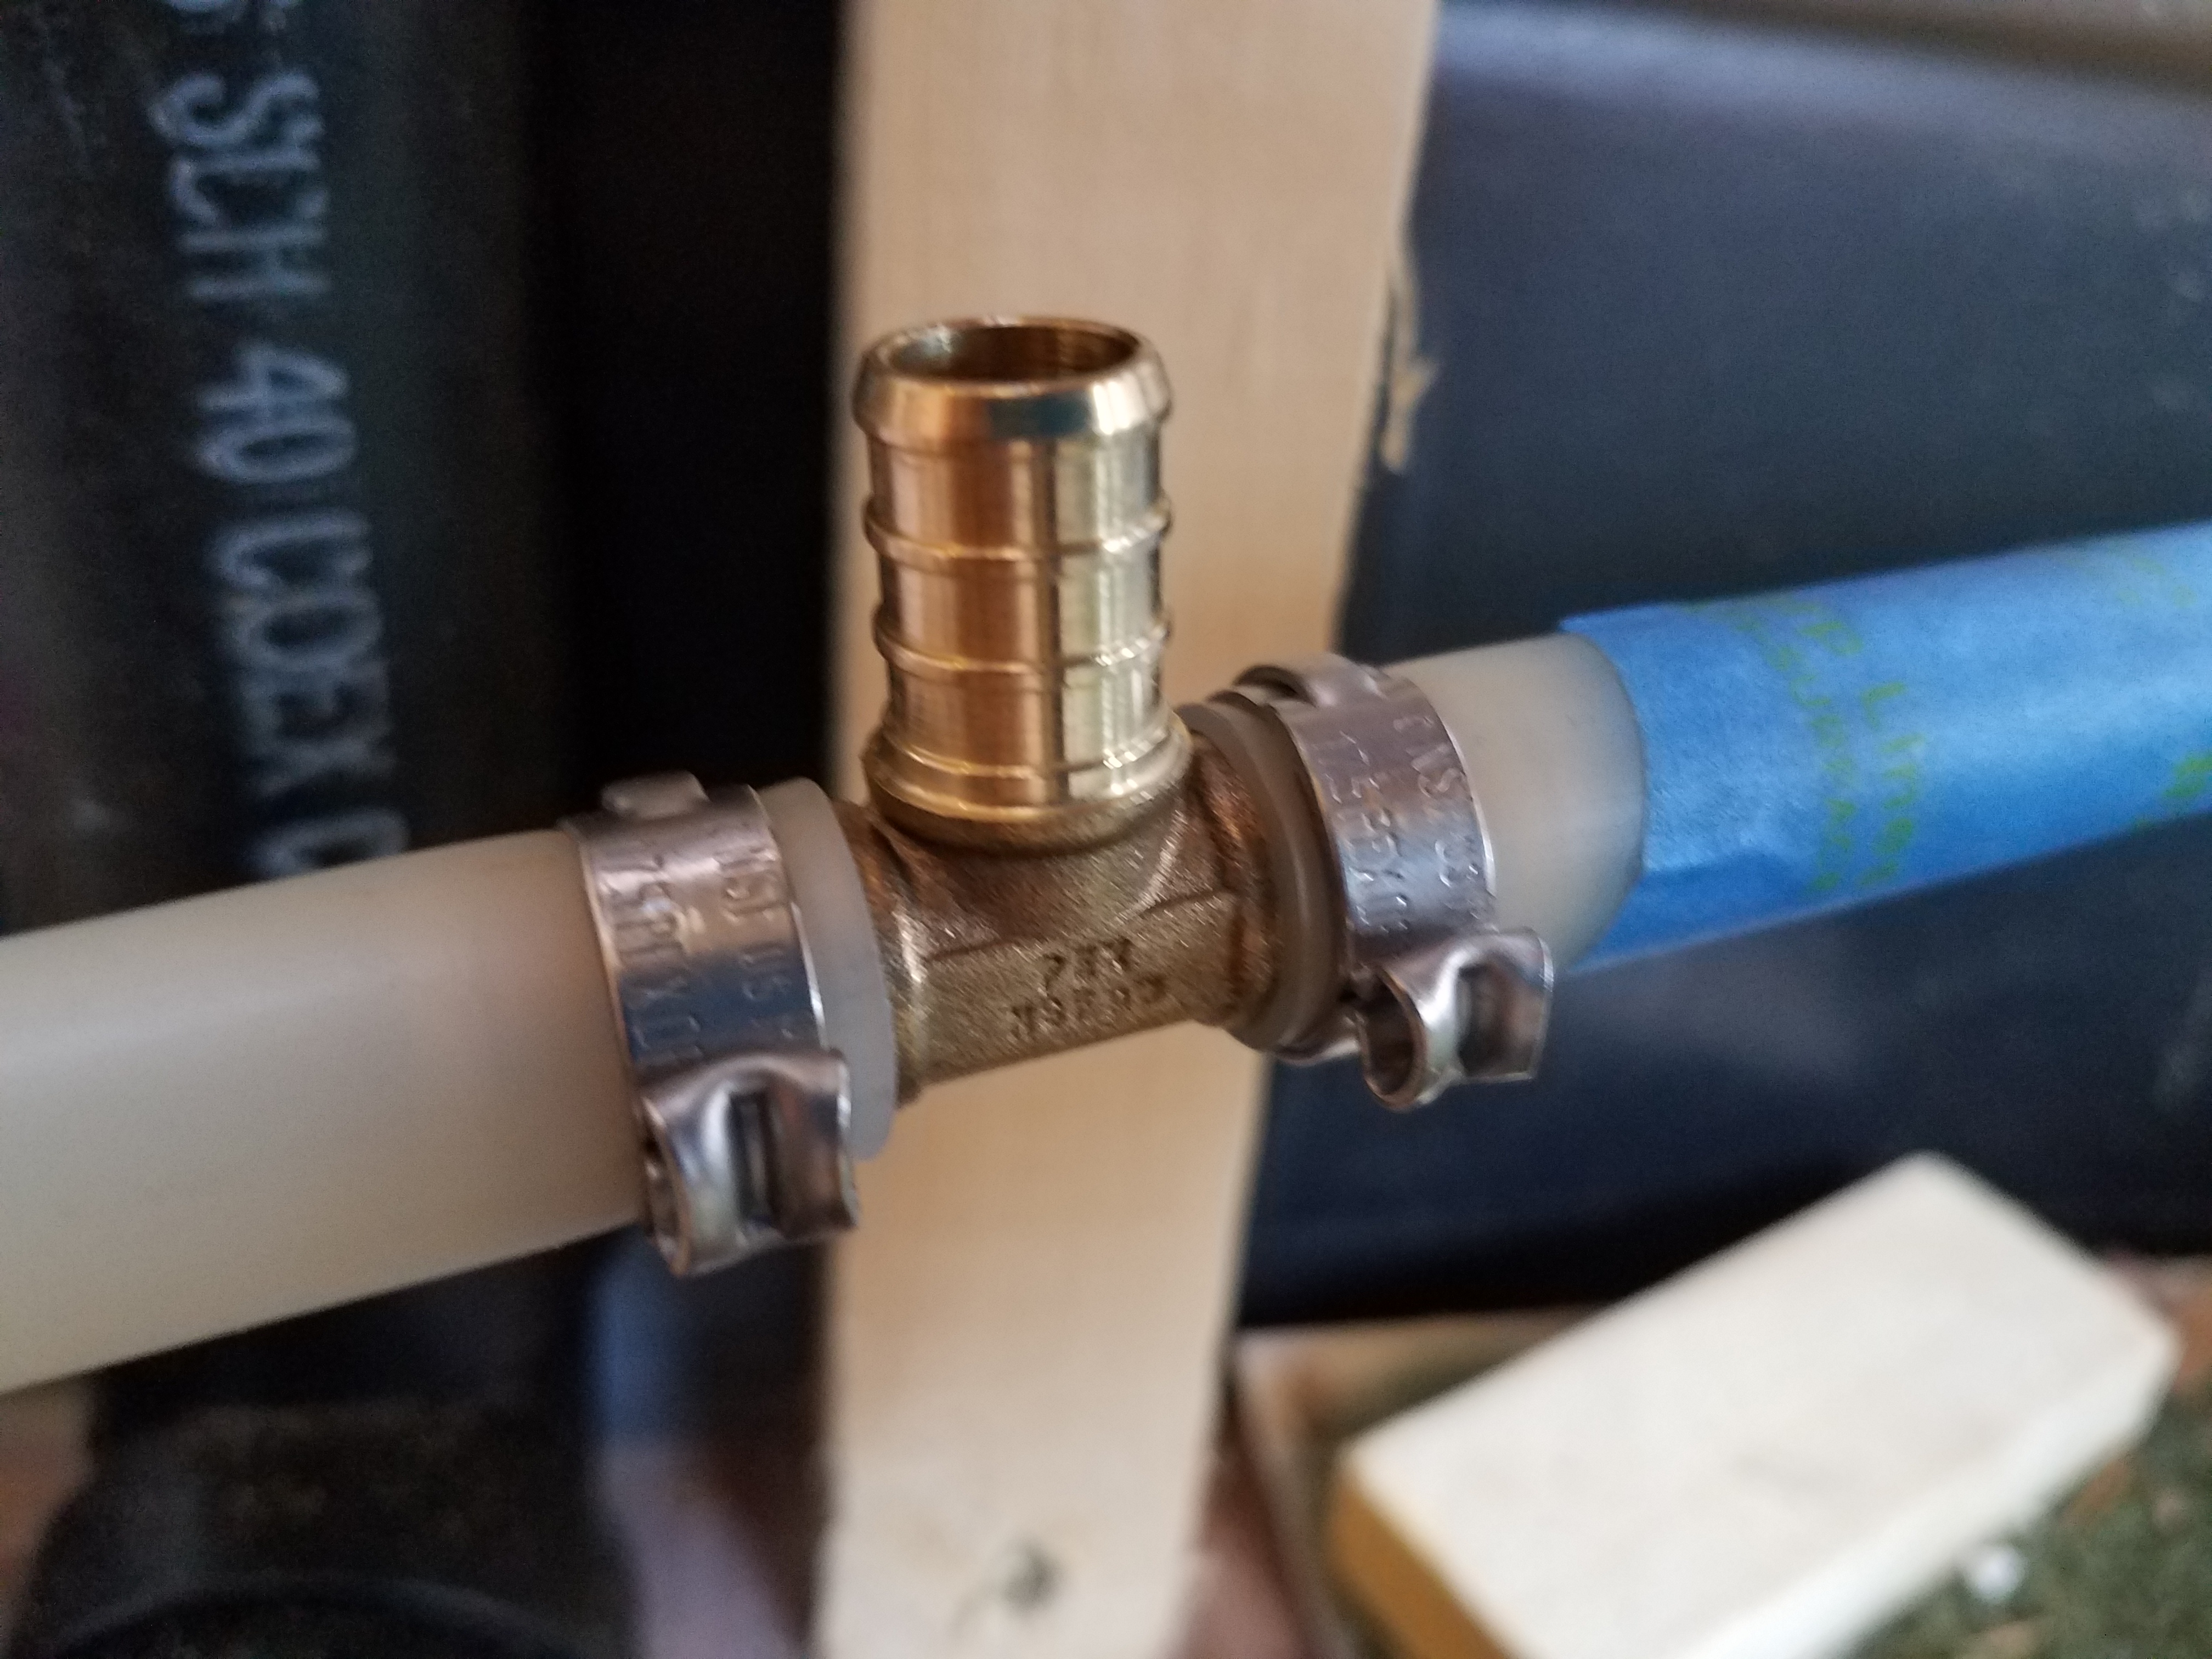 PEX tubing with a copper T fitting